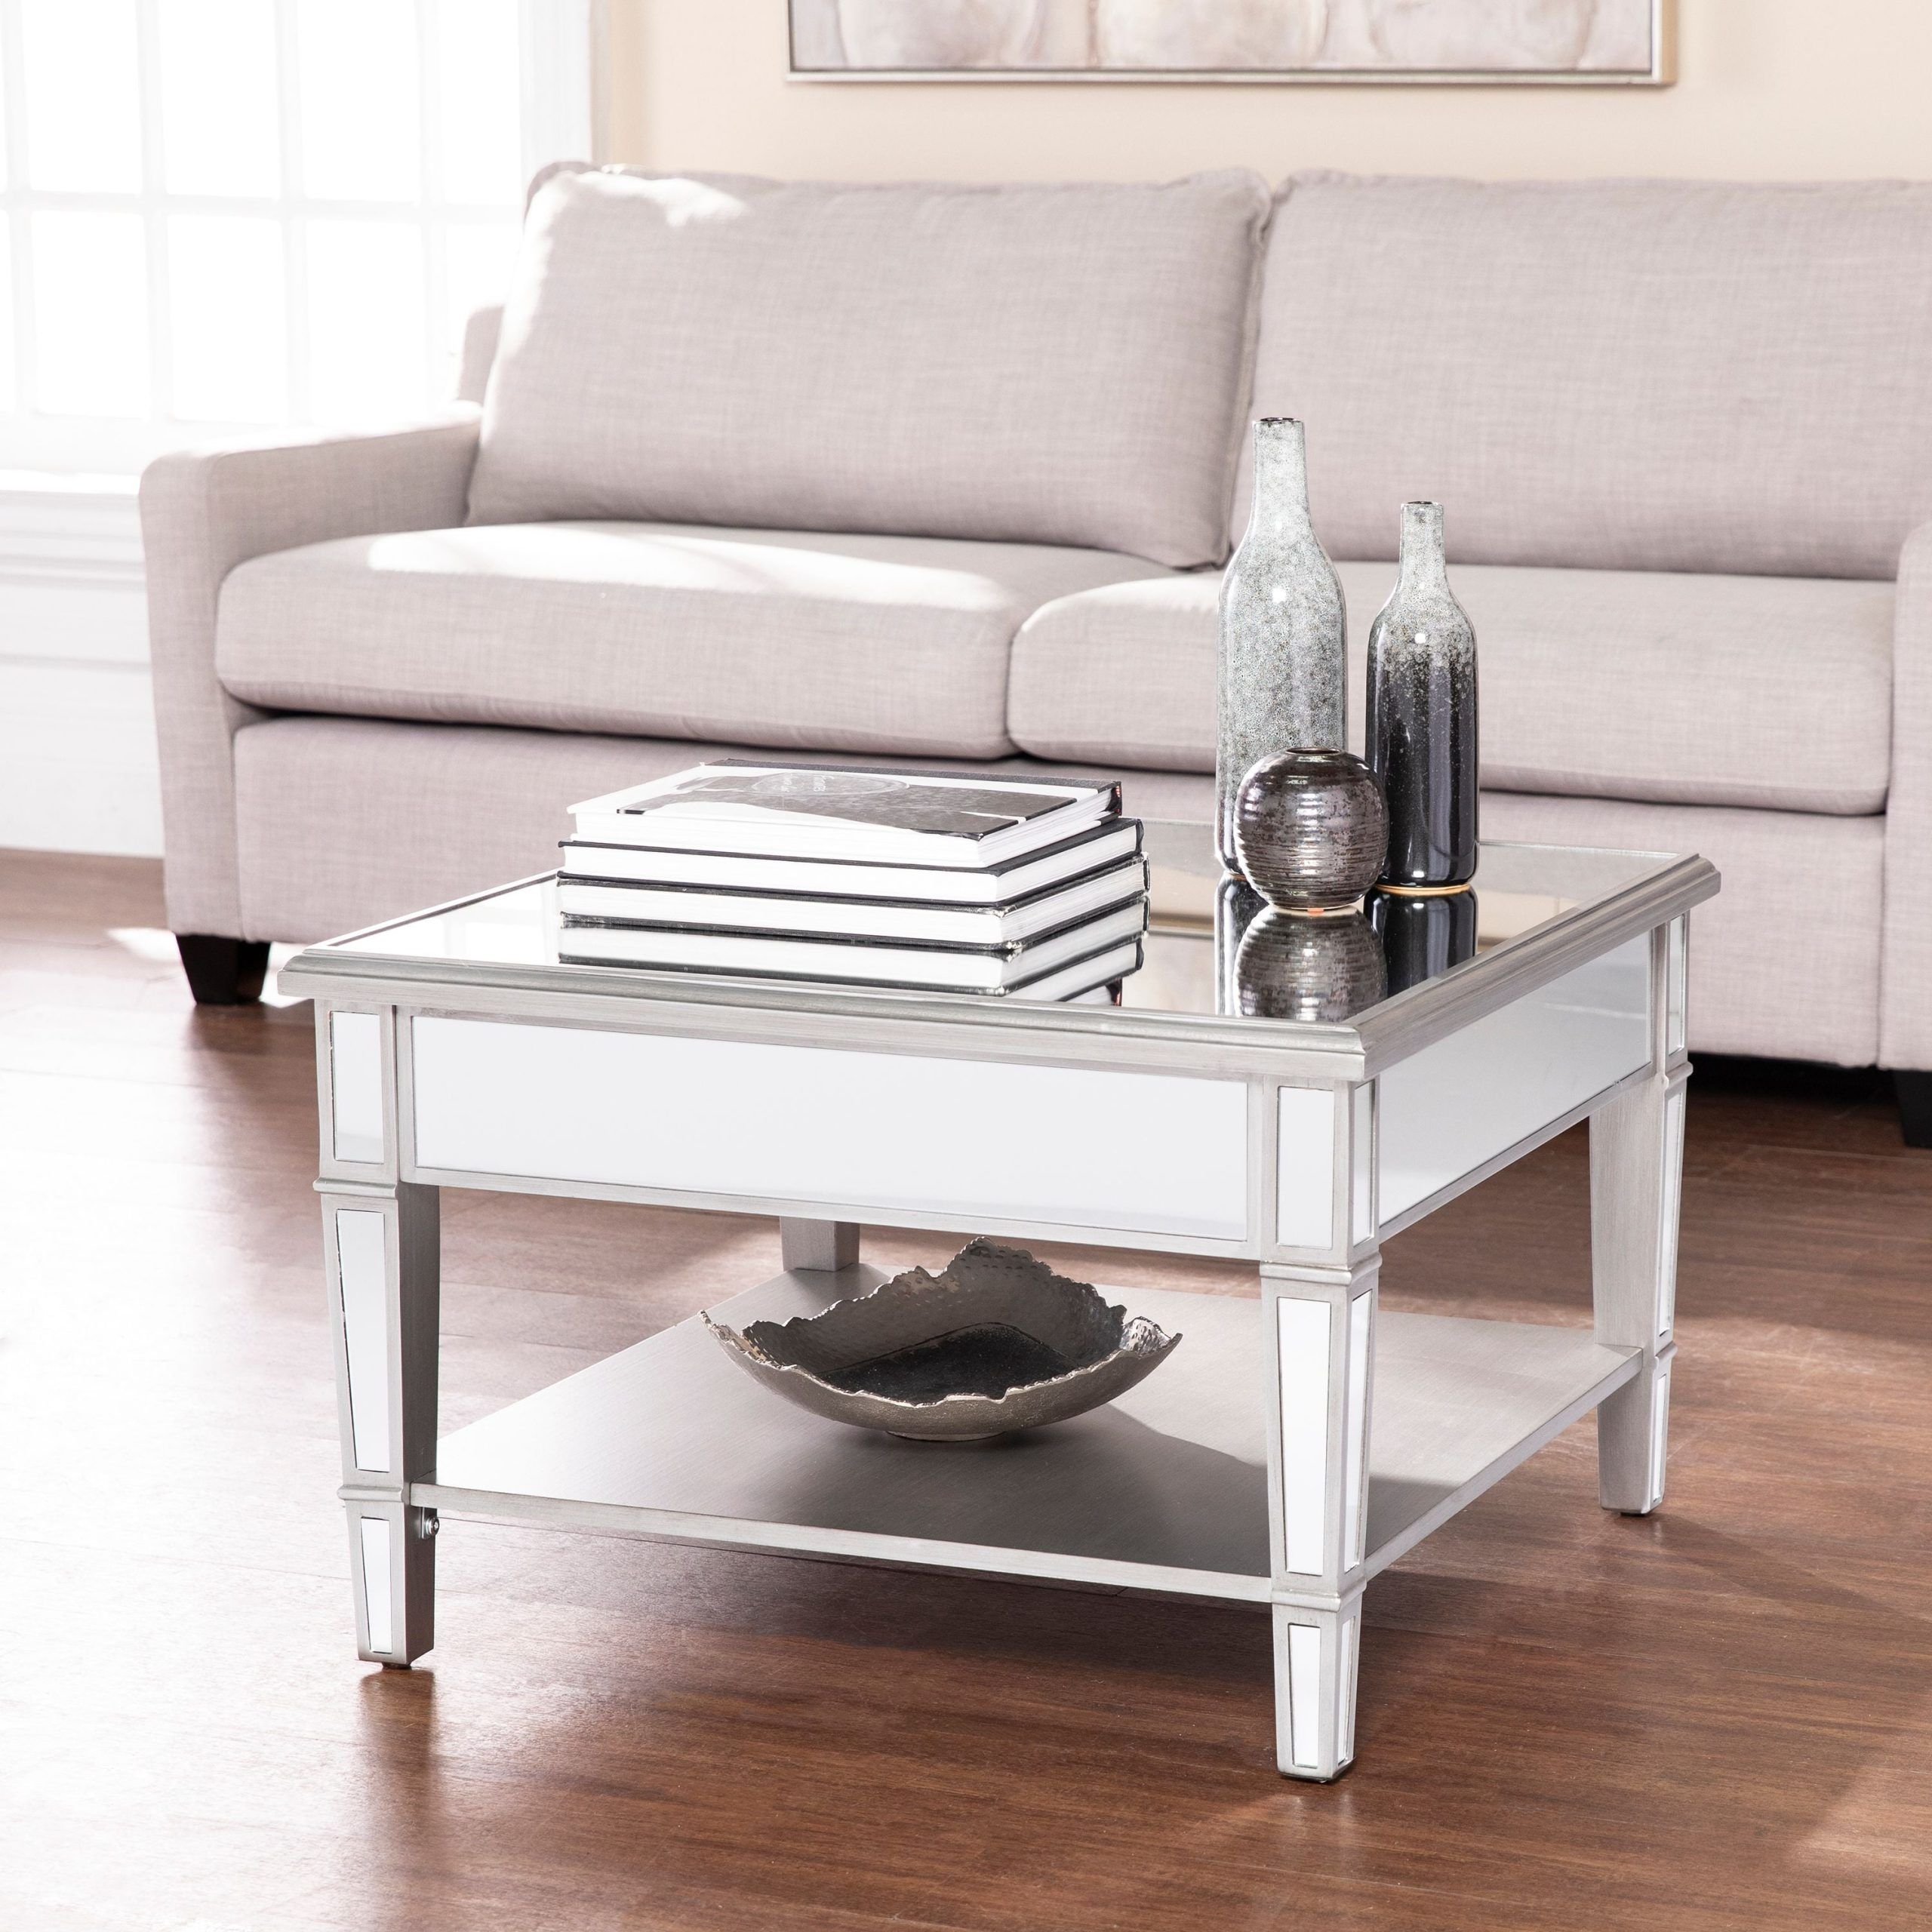 Ember Interiors Larksmill Mirrored Console Table, Silver – Walmart Throughout Southern Enterprises Larksmill Coffee Tables (View 4 of 5)